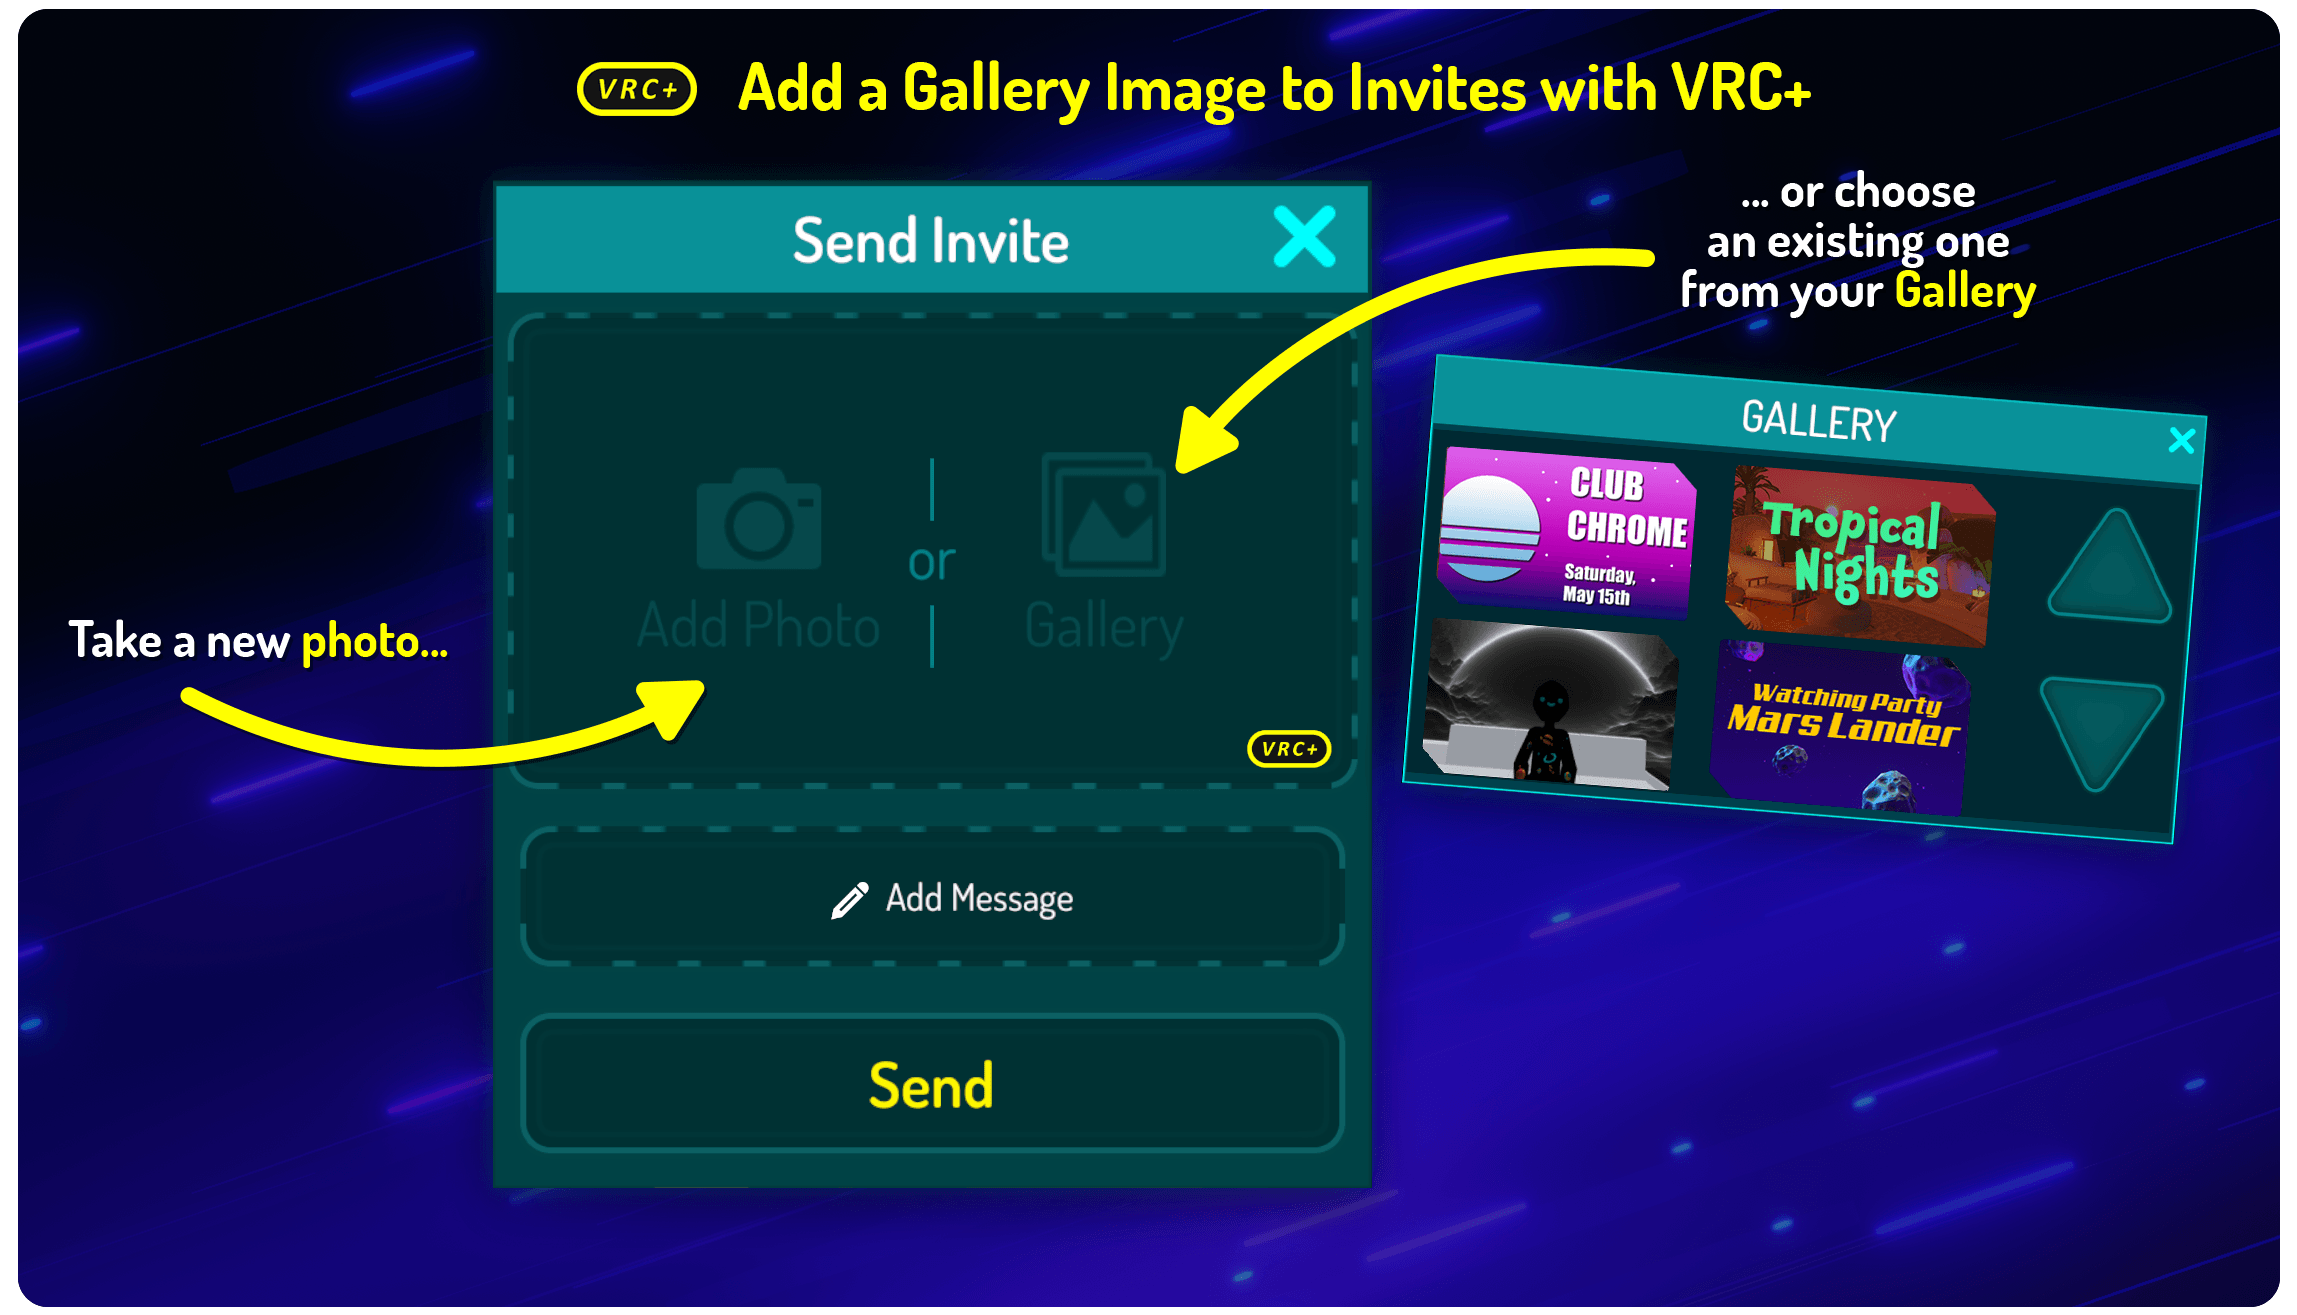 Use Gallery Images with your VRC+ invites!